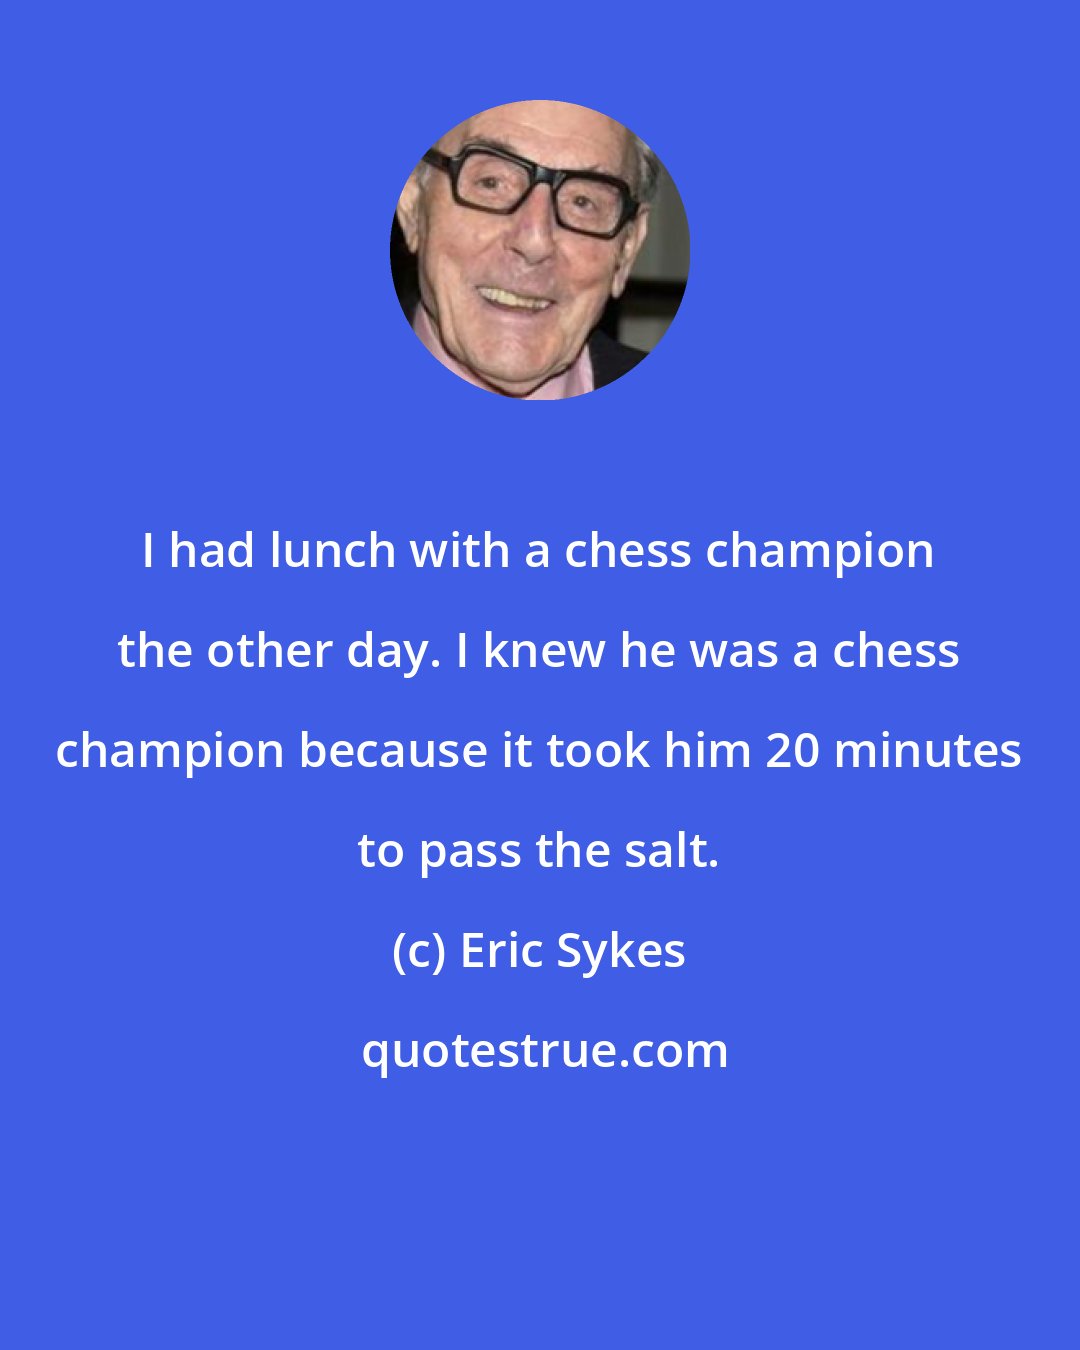 Eric Sykes: I had lunch with a chess champion the other day. I knew he was a chess champion because it took him 20 minutes to pass the salt.